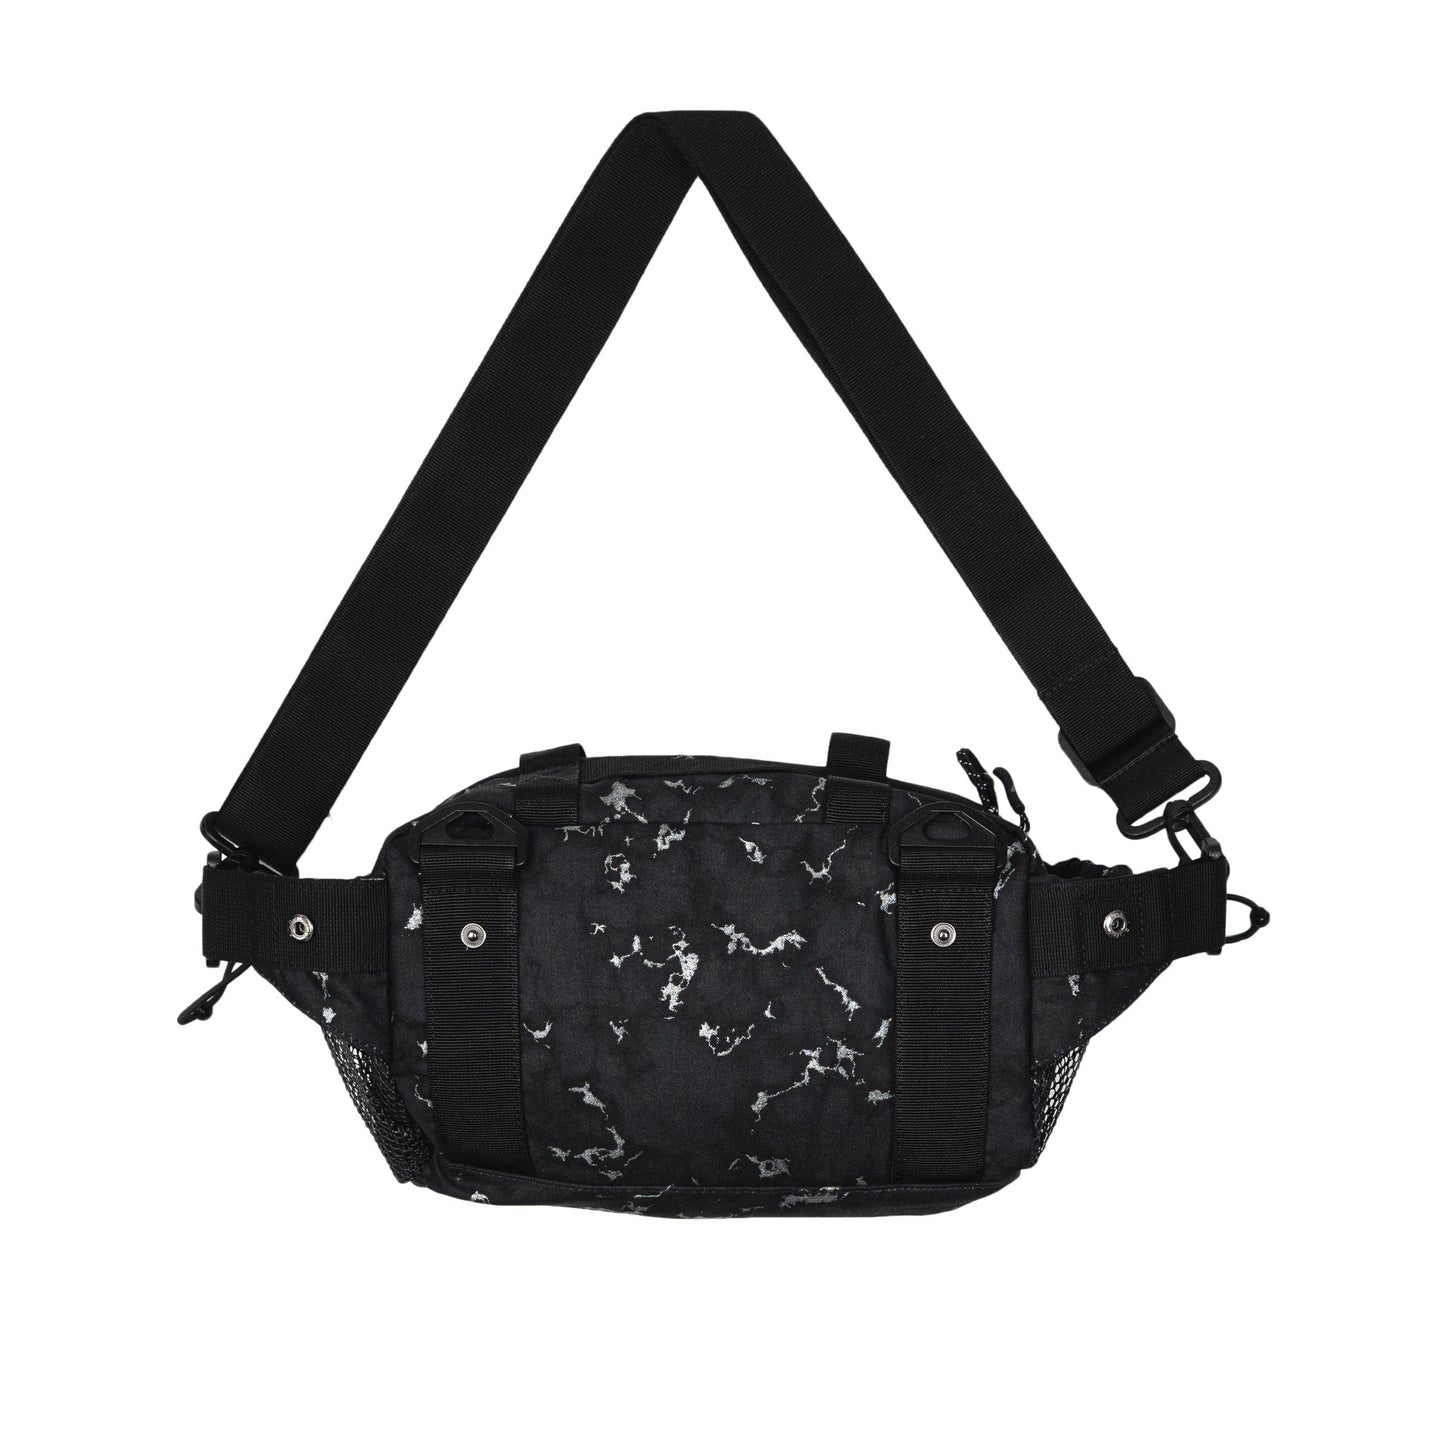 Load image into Gallery viewer, Two-Way Shoulder Bag - Marble Black
